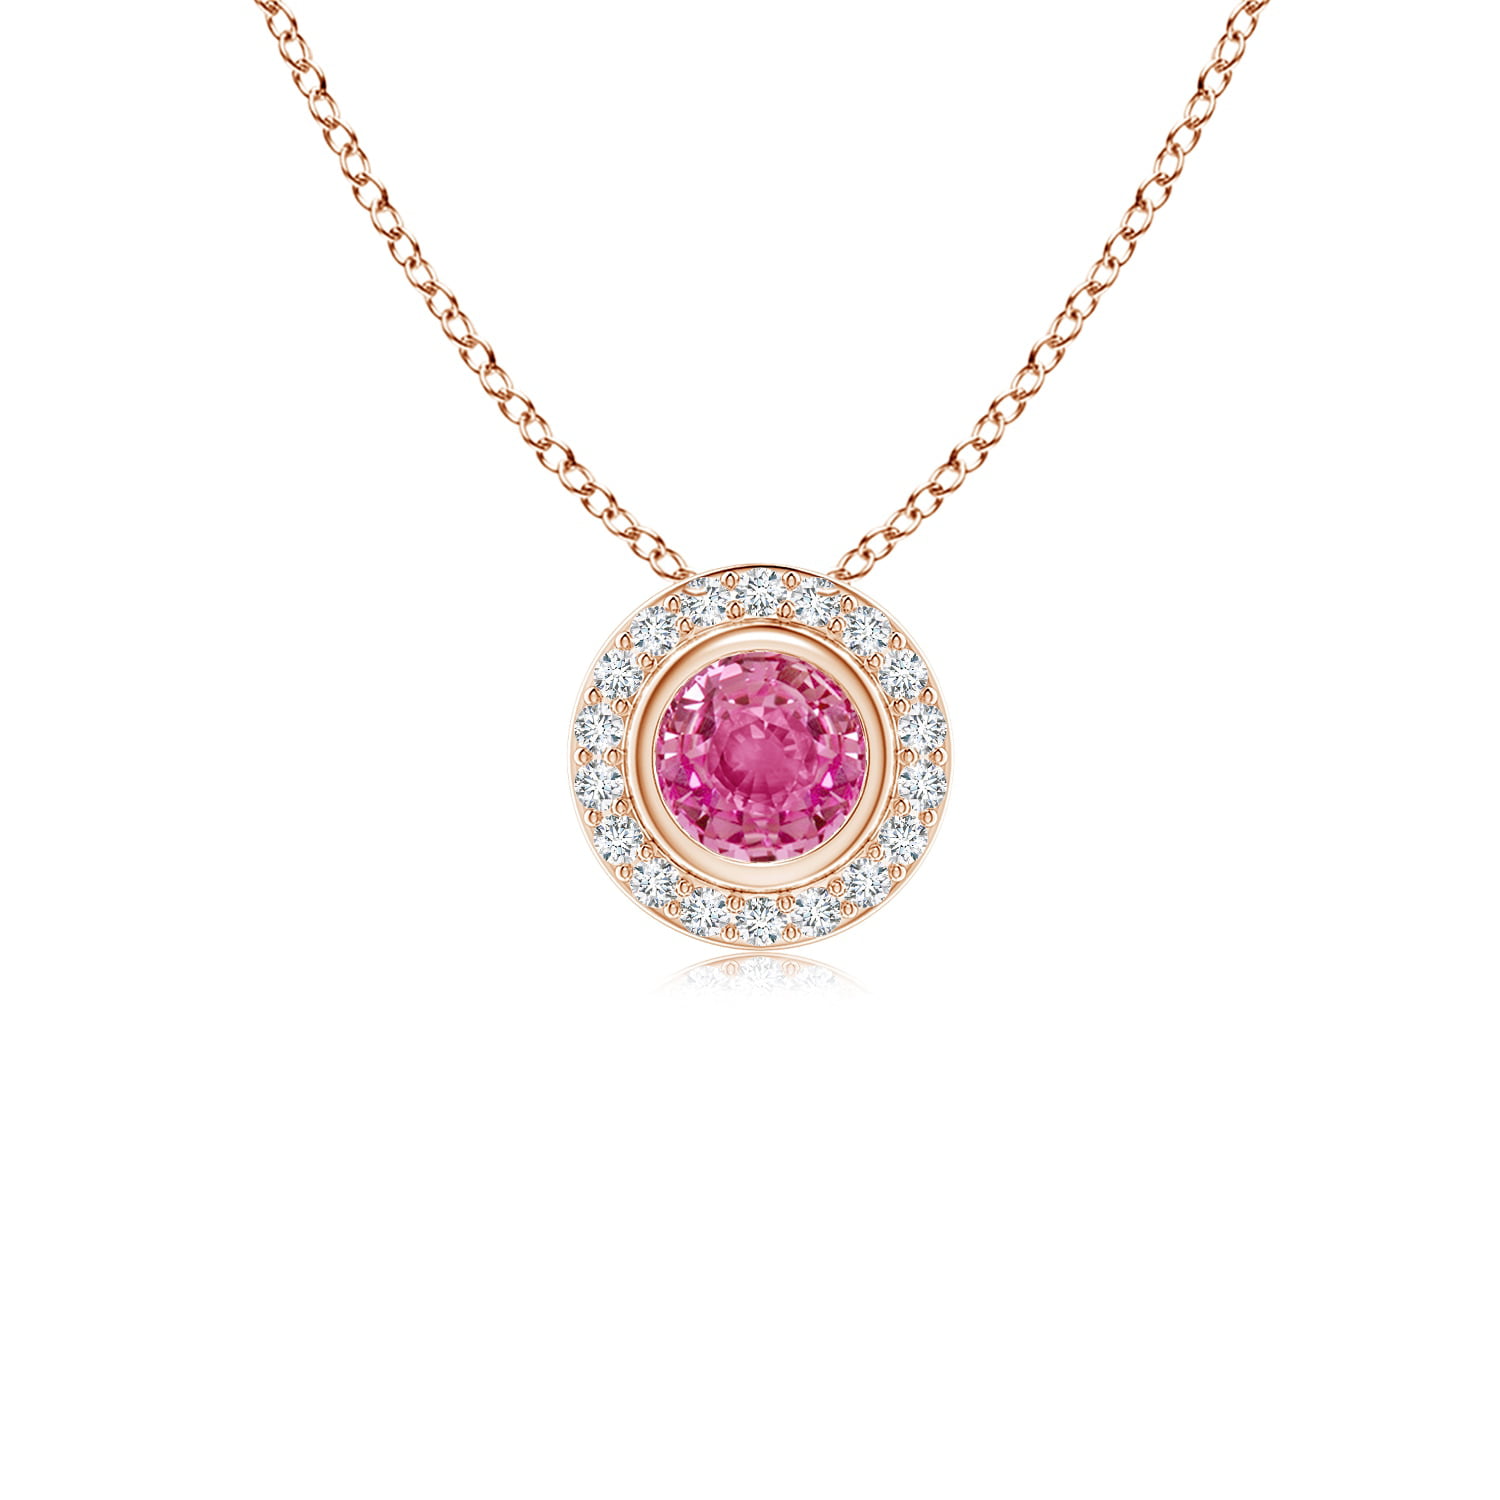 Details about   14k White Gold Lab-Created Pink Sapphire and Diamond Cat Pendant